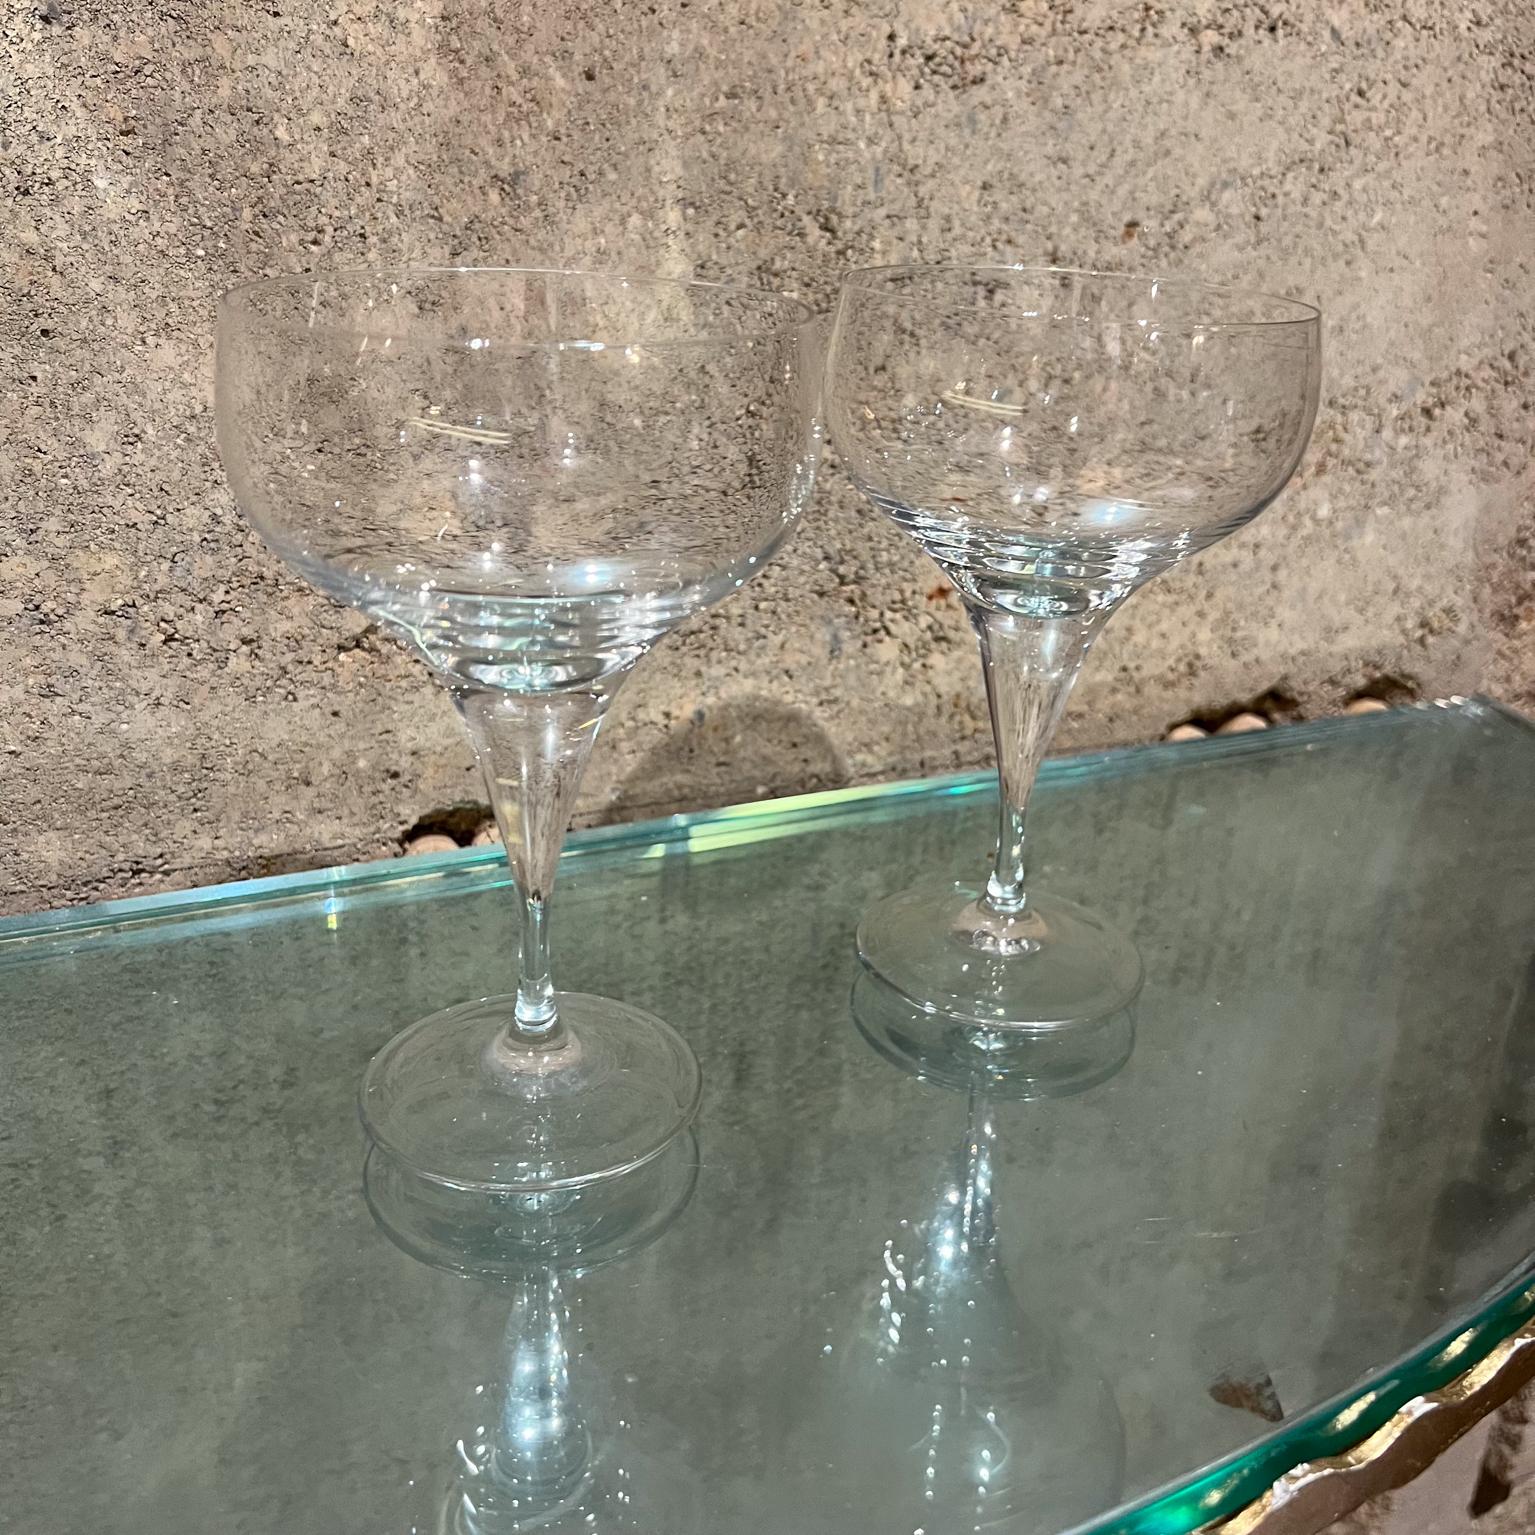 
1980s Rosenthal Crystal Champagne Glasses Coupe Bjorn Wiinblad
Set of two glasses
6 h x 3.5 diameter
Preowned vintage condition unrestored.
Refer to images.